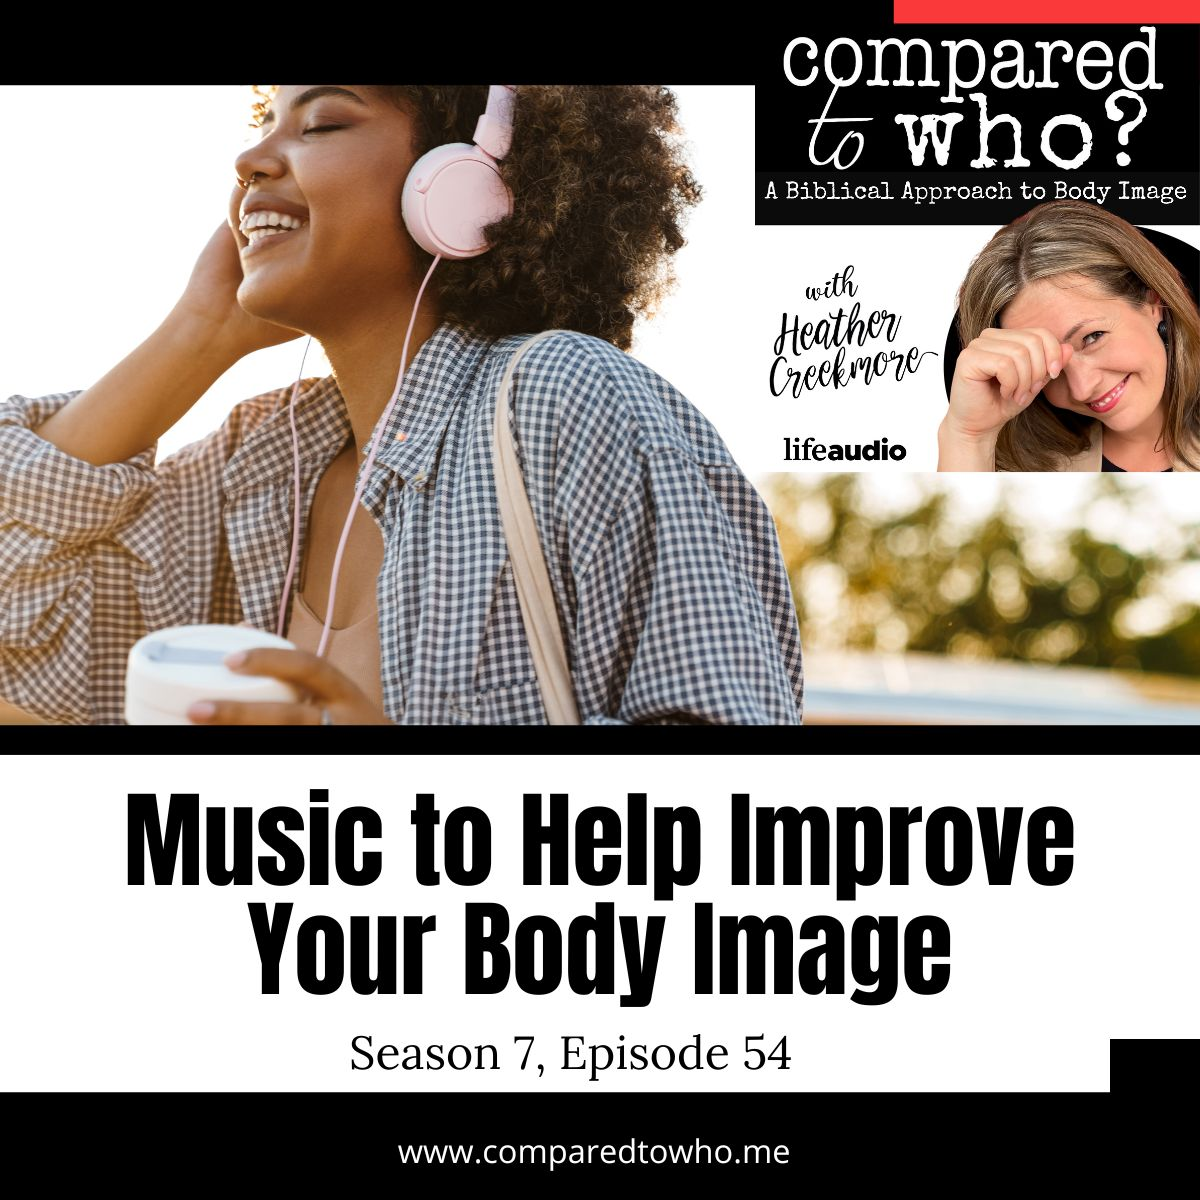 Christian Music to Improve Your Body Image 2023